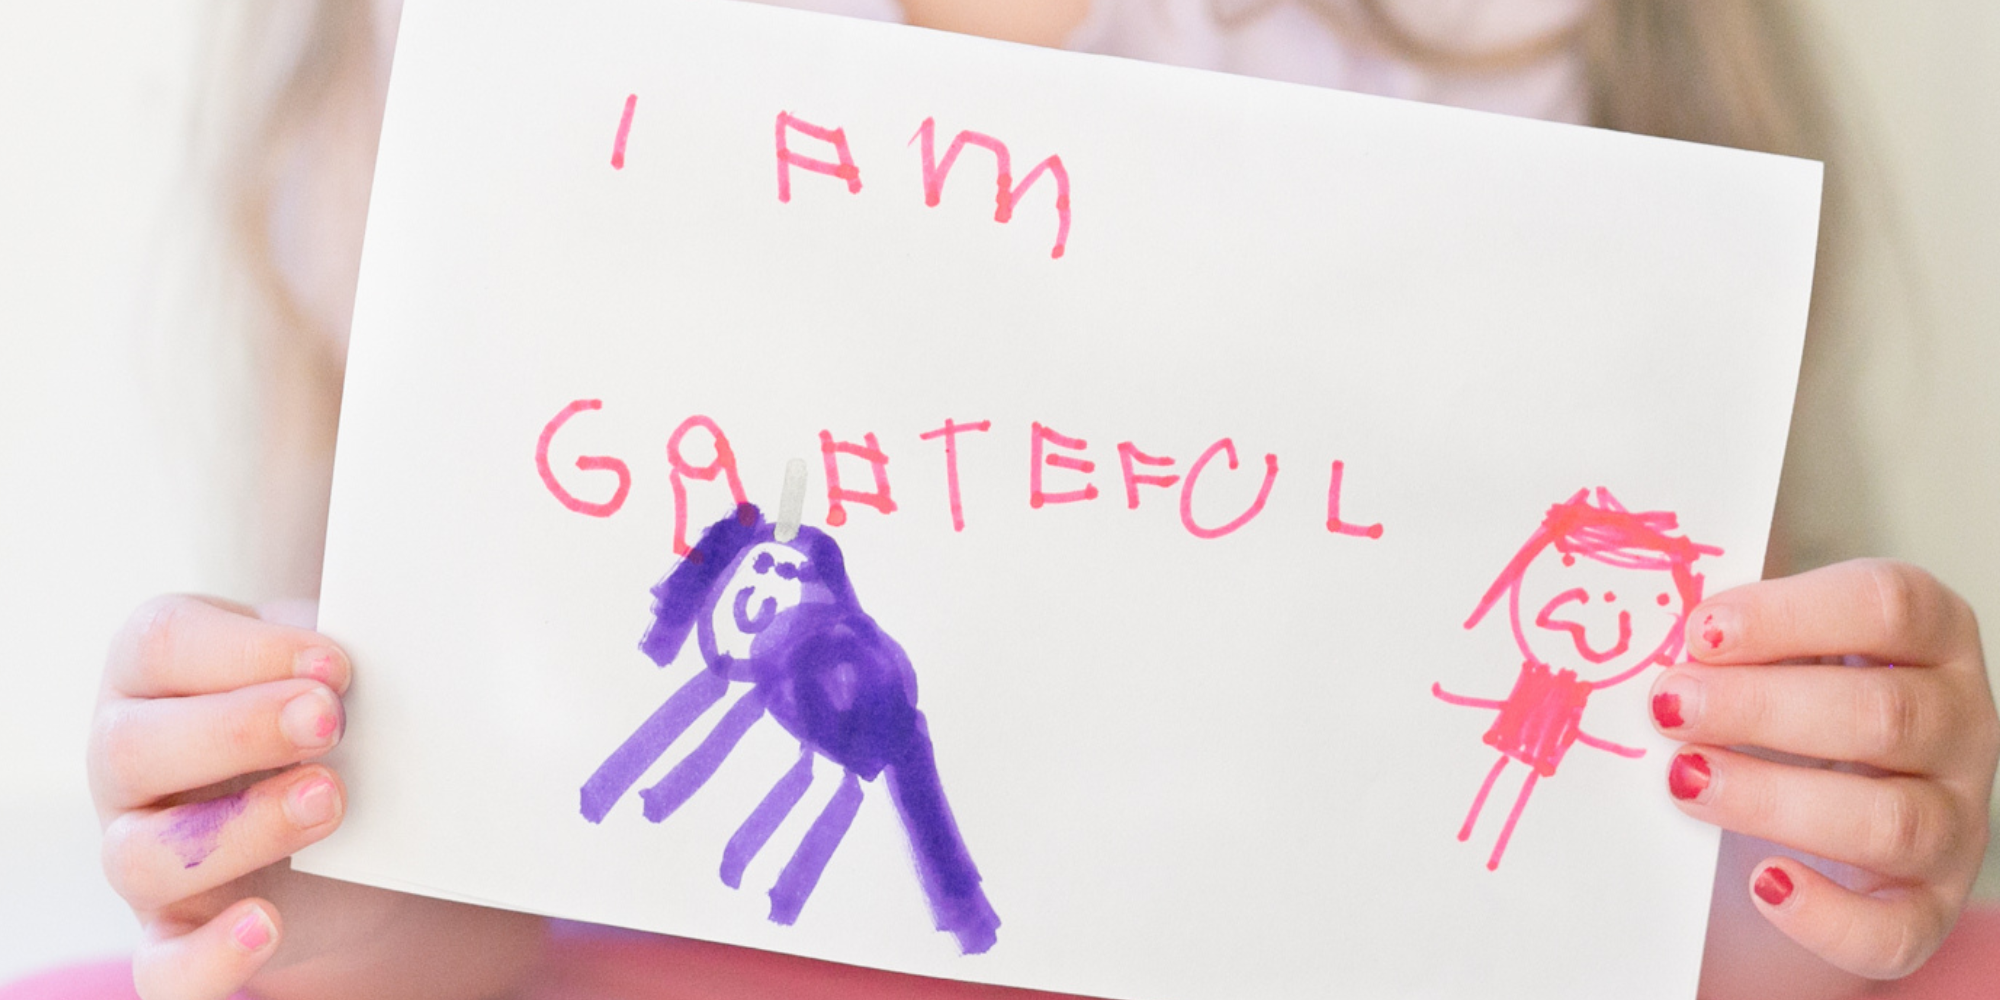 Tiny hands with red chipped nail polish hold a rectangle of white paper. Written in pink marker in a child's handwriting is "I am grateful" . Under the text are two stick people, one in purple marker and the other in pink.